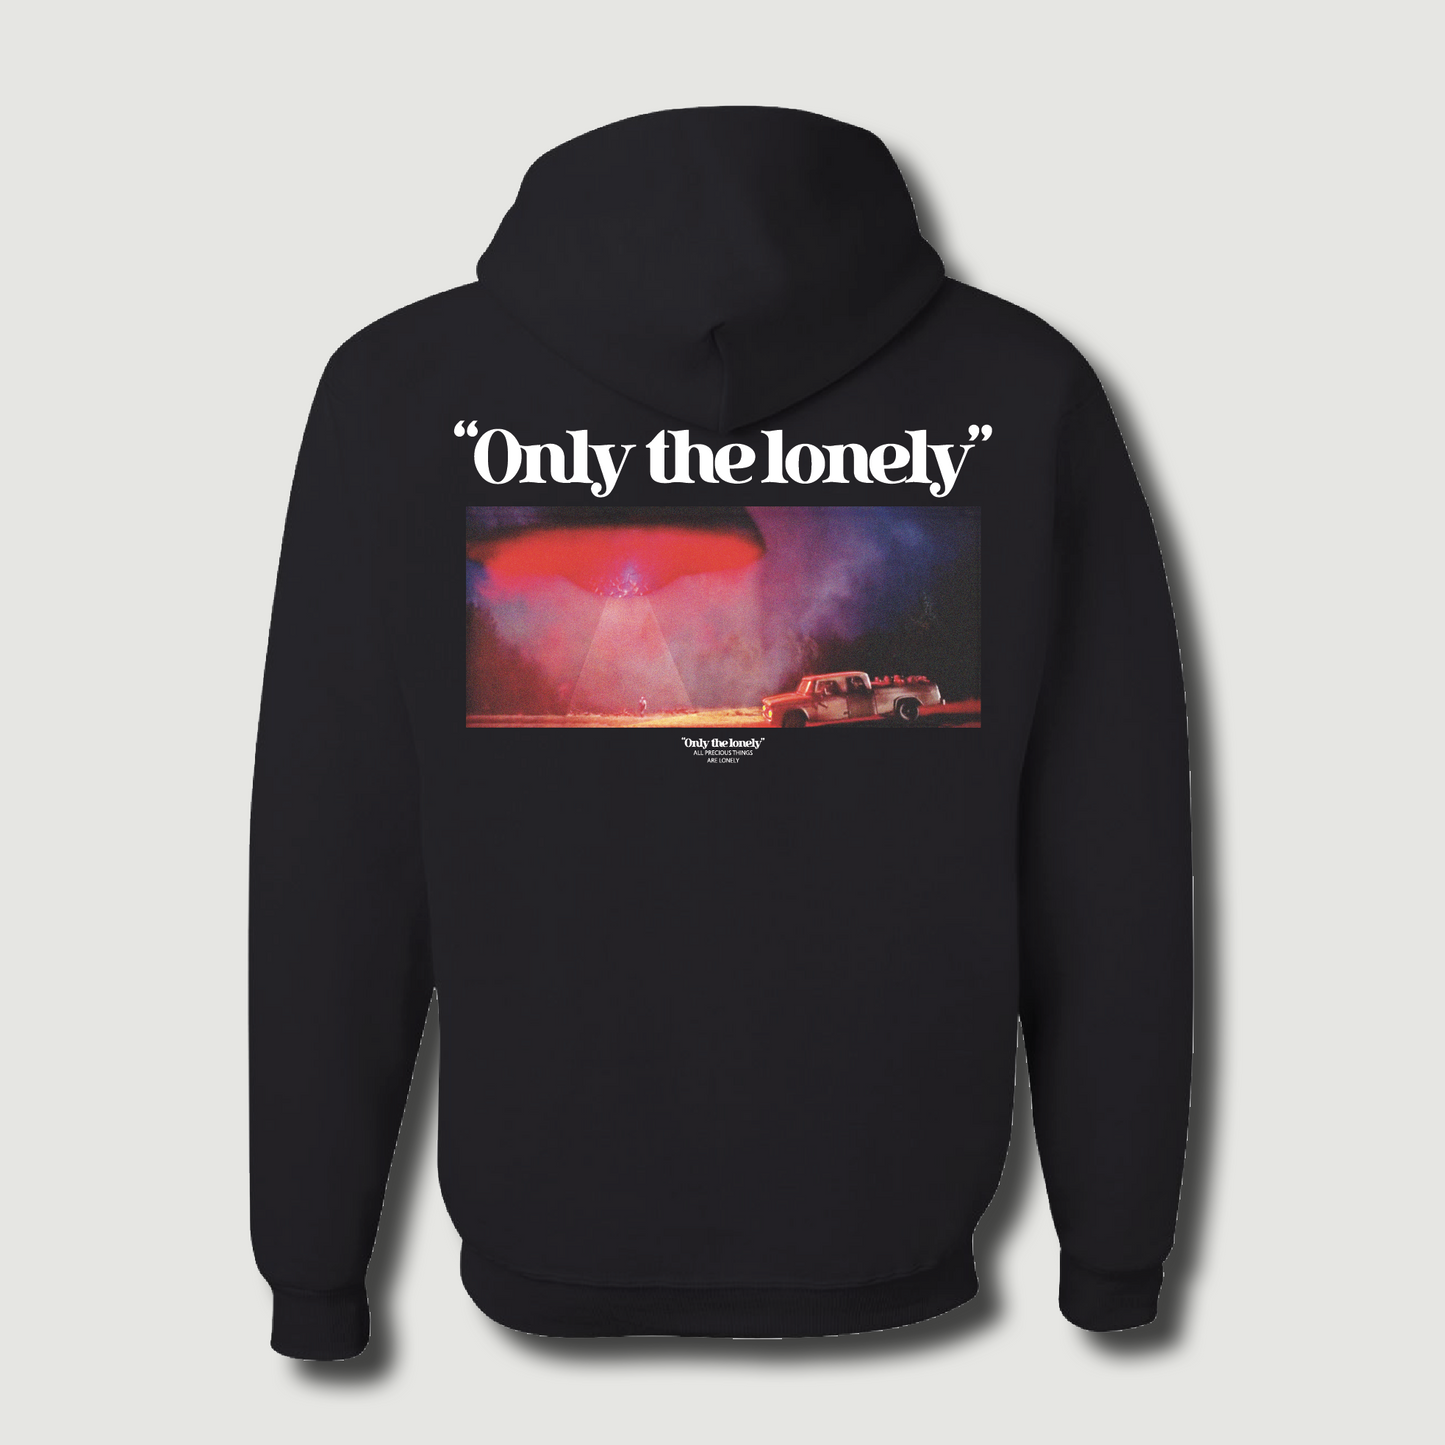 ONLY THE LONELY "NIGHT MOVES" HOODIE